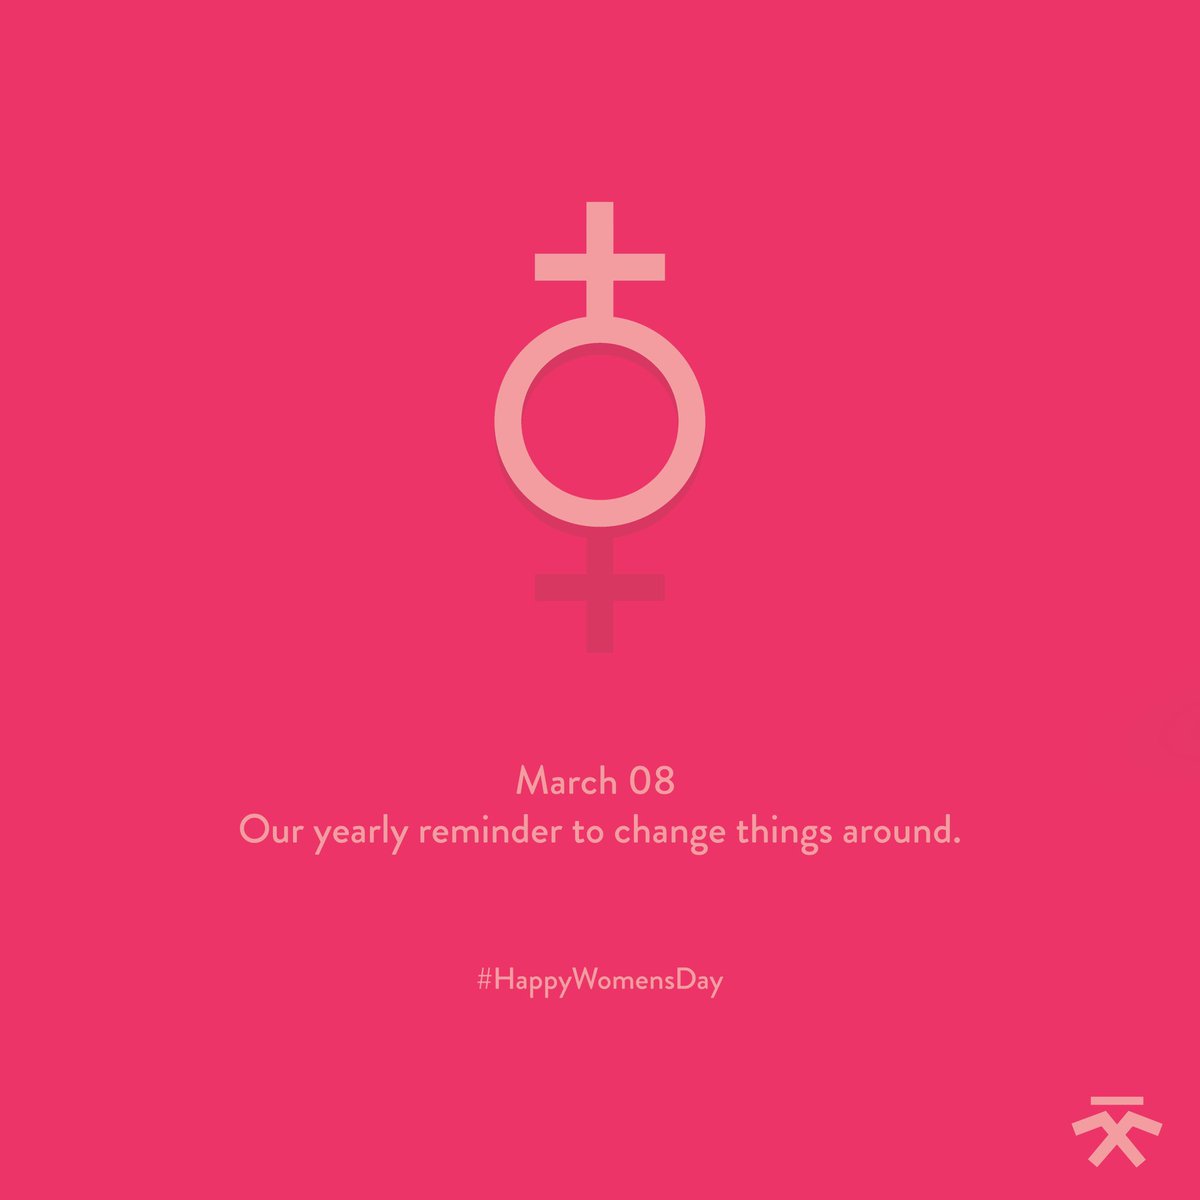 Alas, reminders can only do so much. Let’s take a step towards the right direction today. #WomensDay #StayWrogn